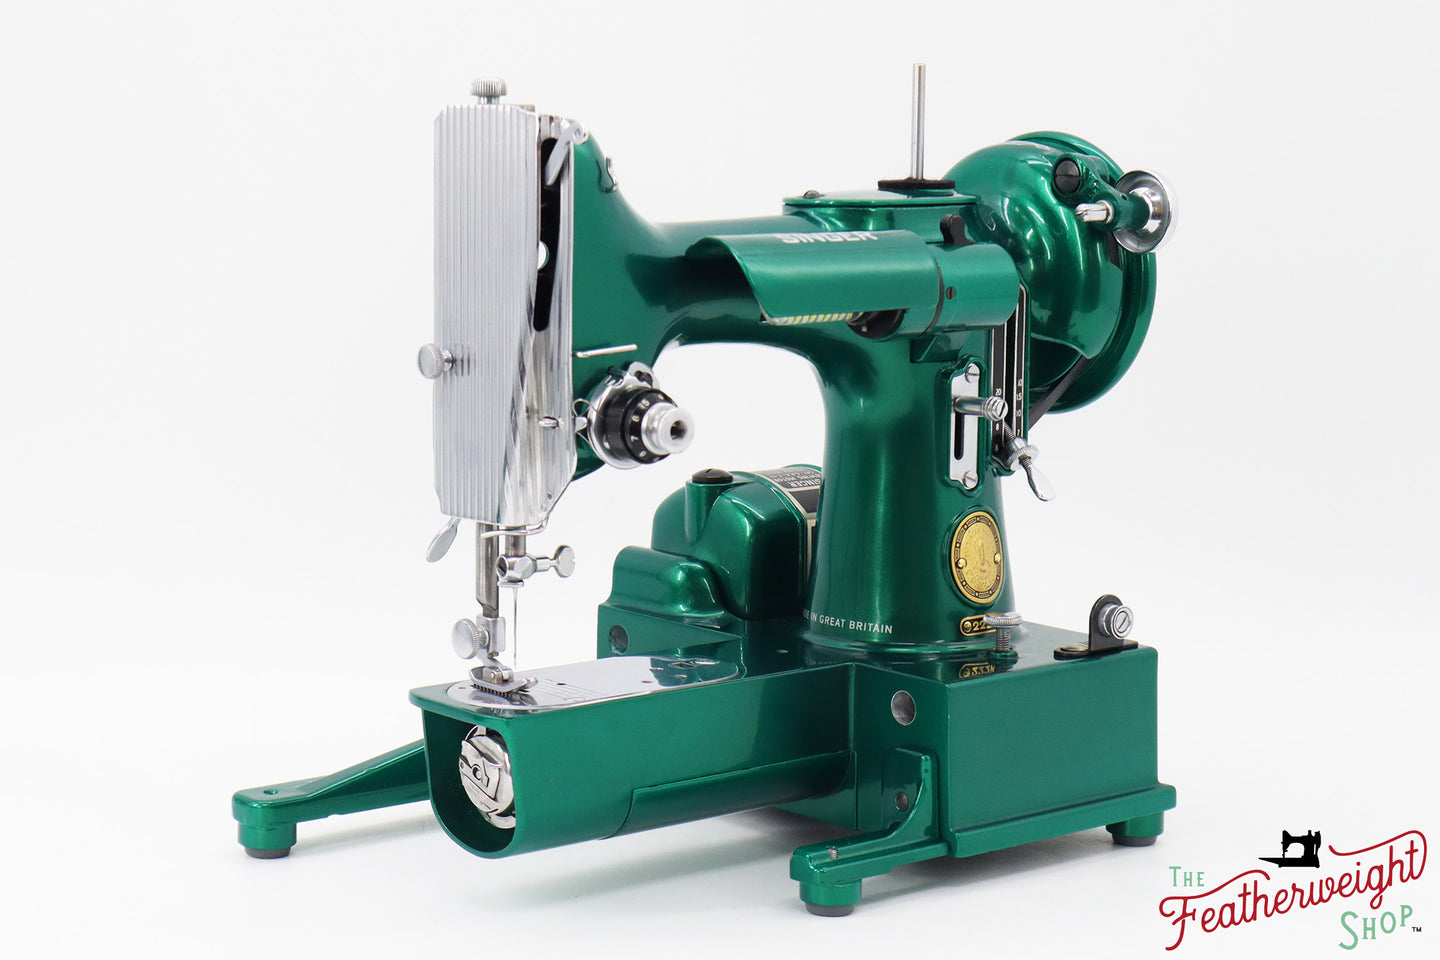 Singer Featherweight 221 and 222 Thread Cutter – The Singer Featherweight  Shop